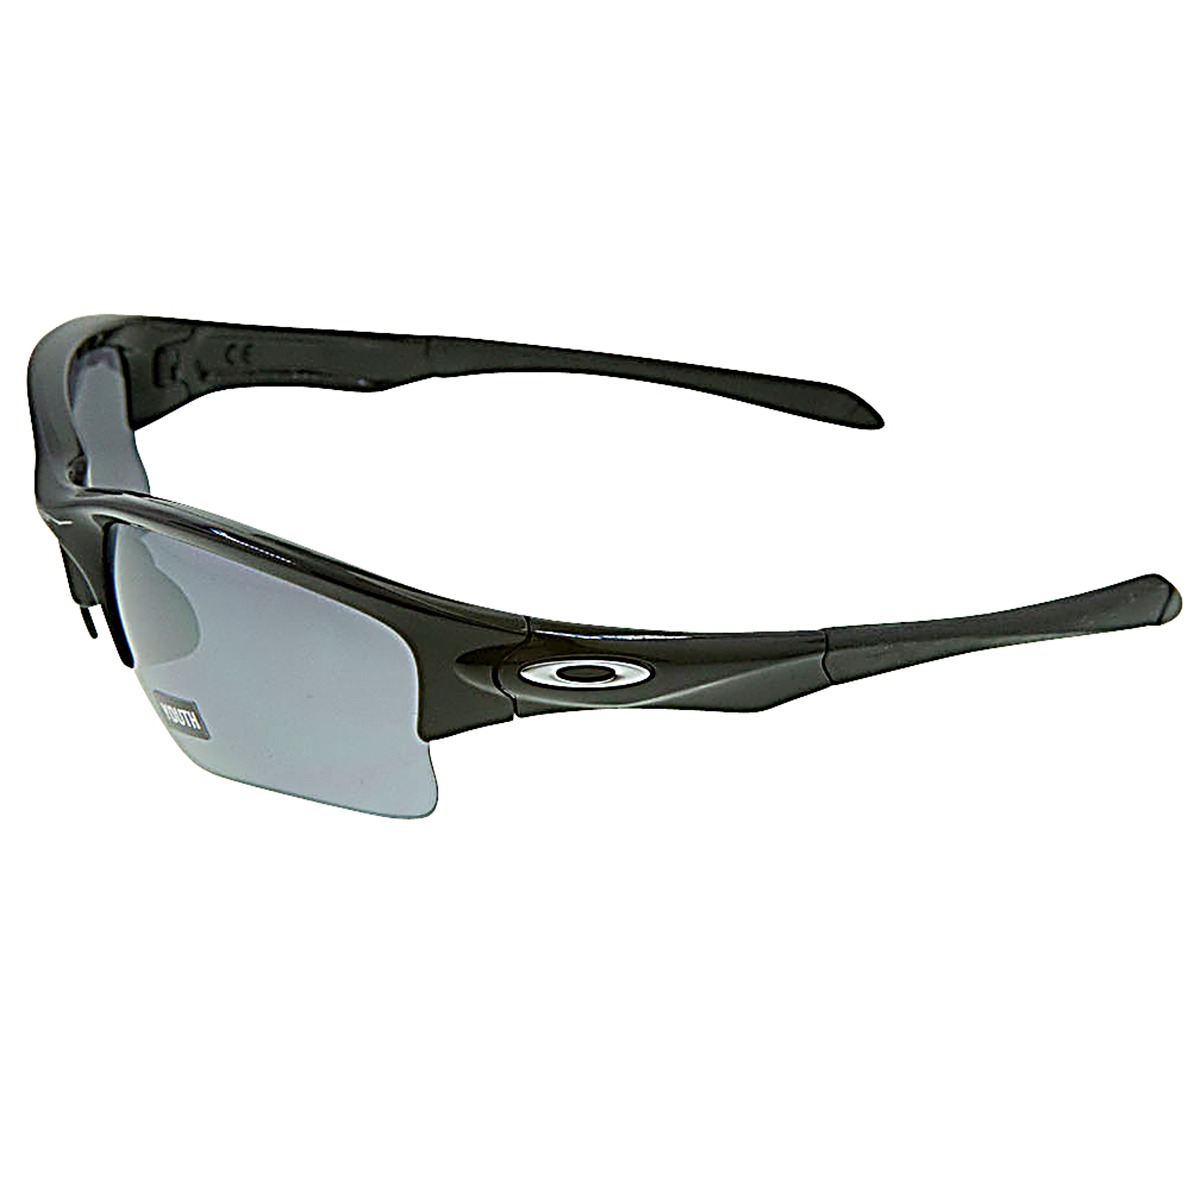 New Authentic Oakley Quarter Jacket Youth Sunglasses 920001